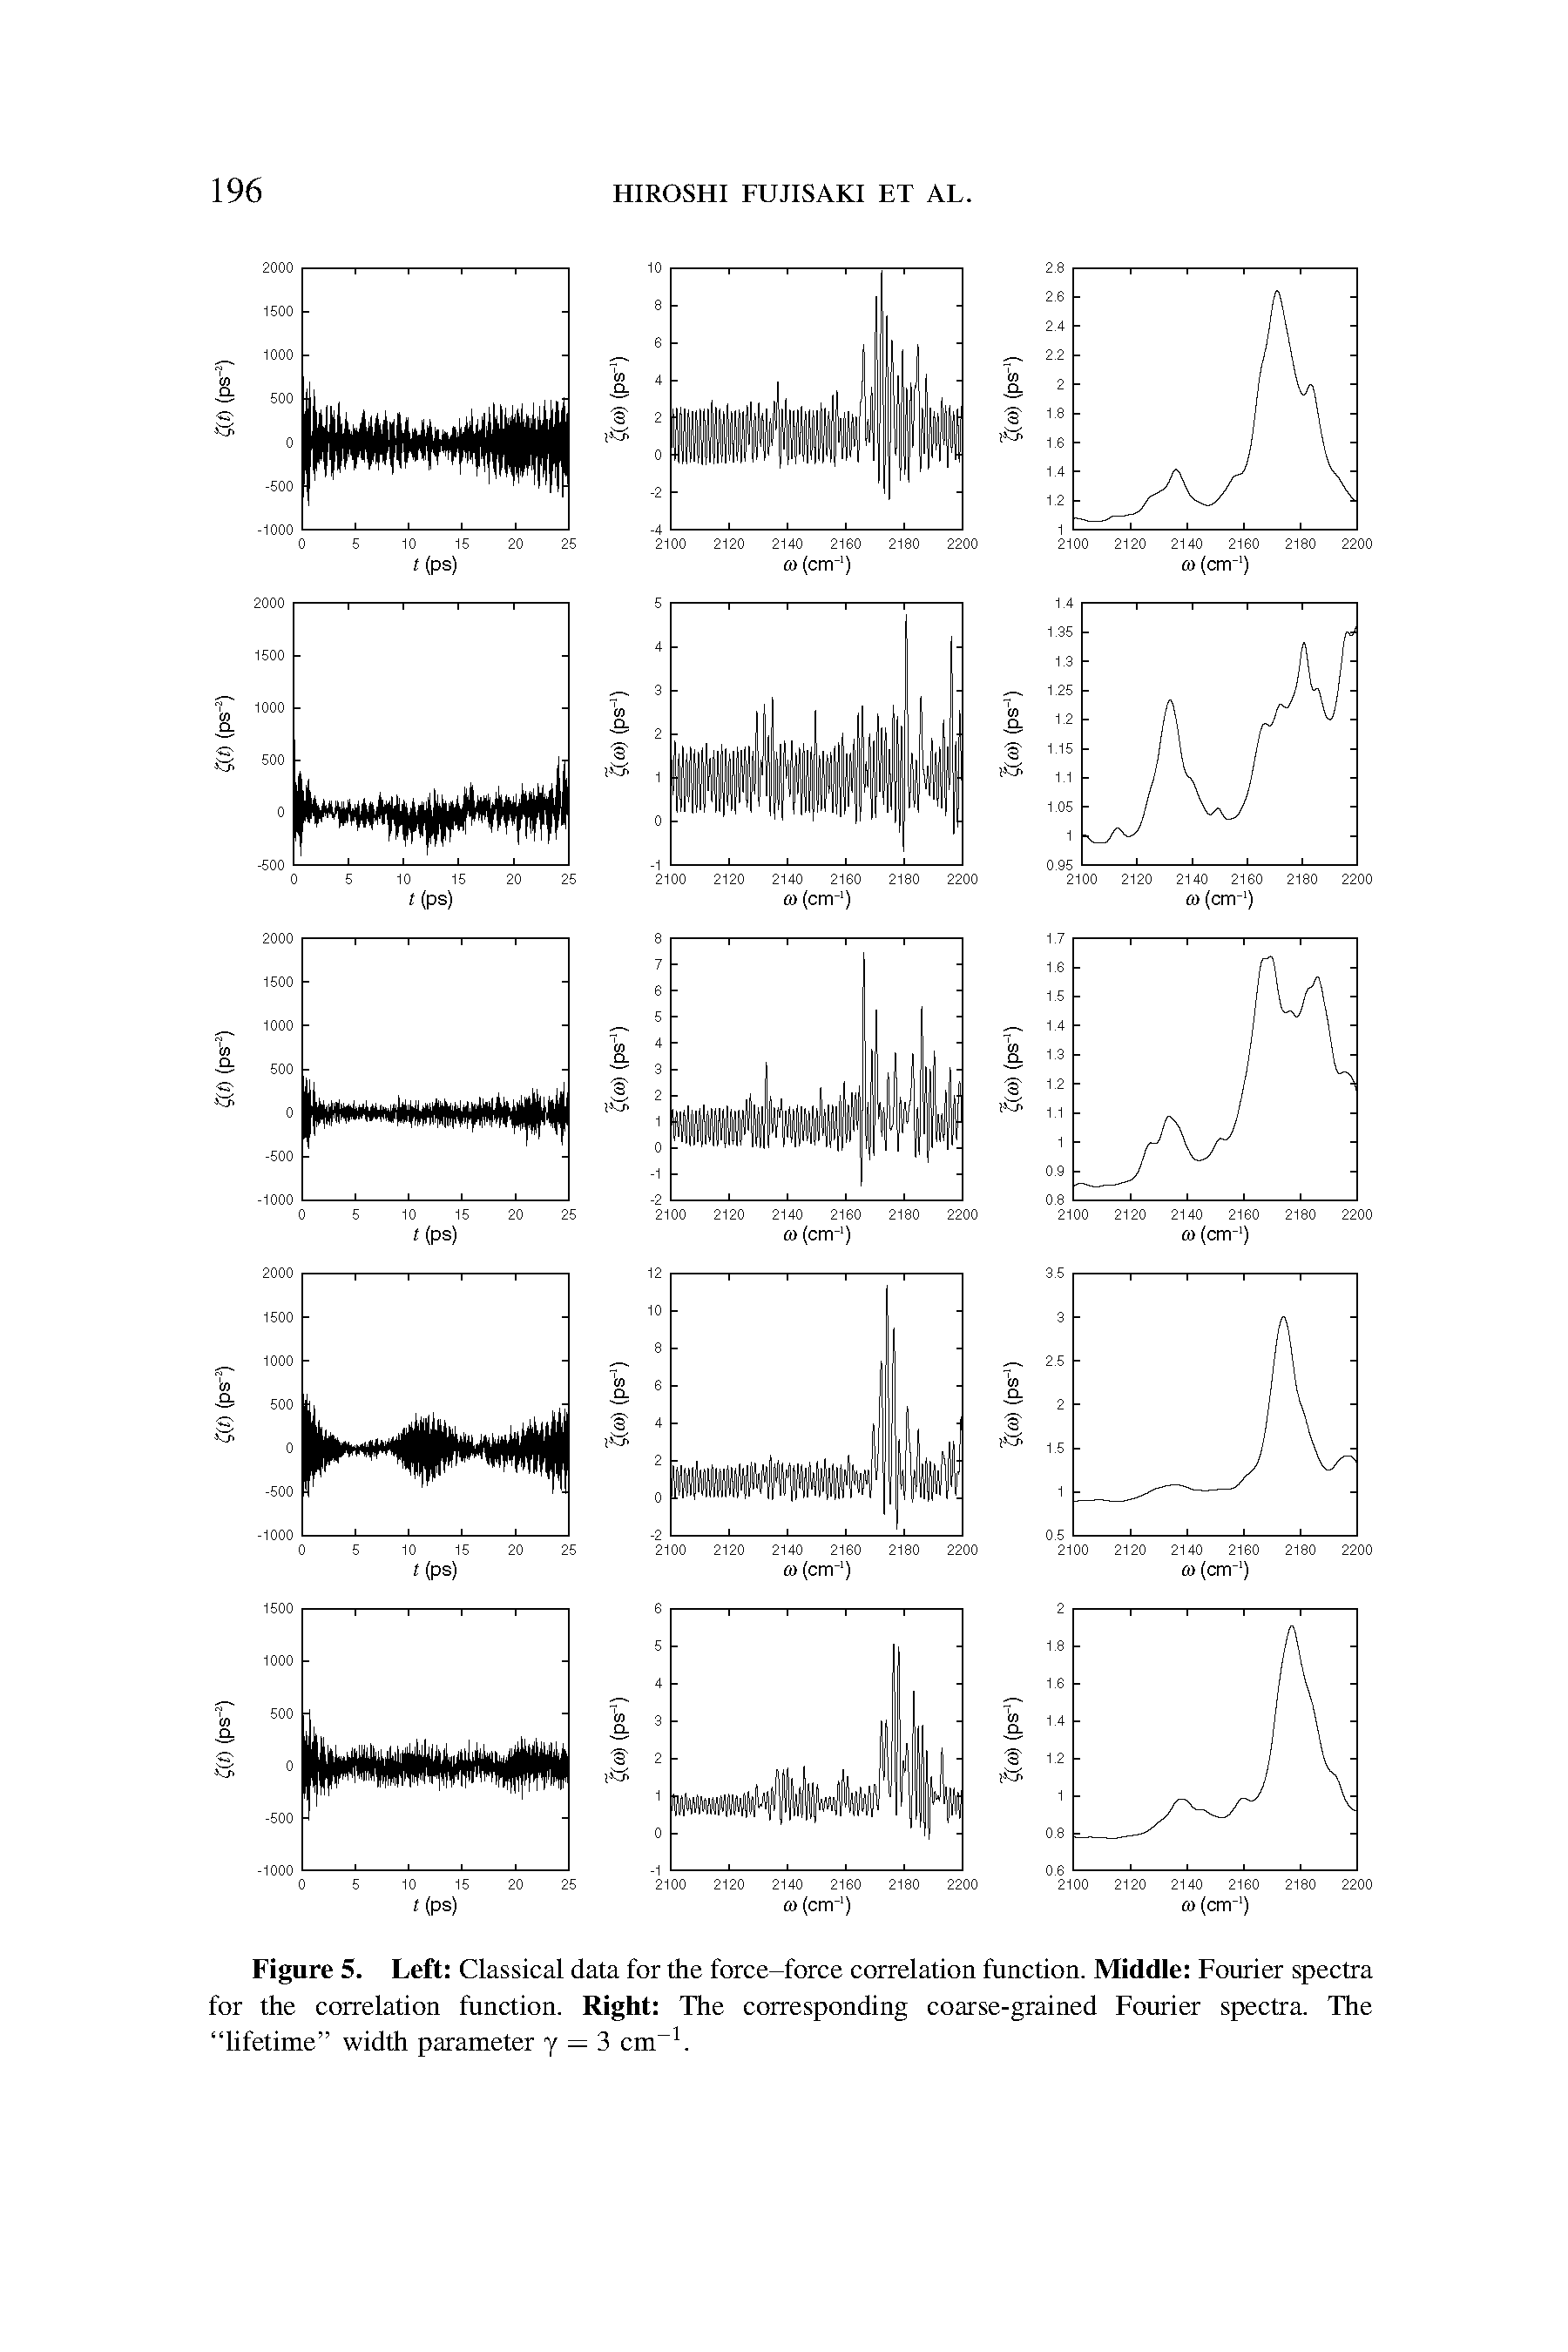 Figure 5. Left Classical data for the force-force correlation function. Middle Fourier spectra for the correlation function. Right The corresponding coarse-grained Fourier spectra. The lifetime width parameter y = 3 cm-1.